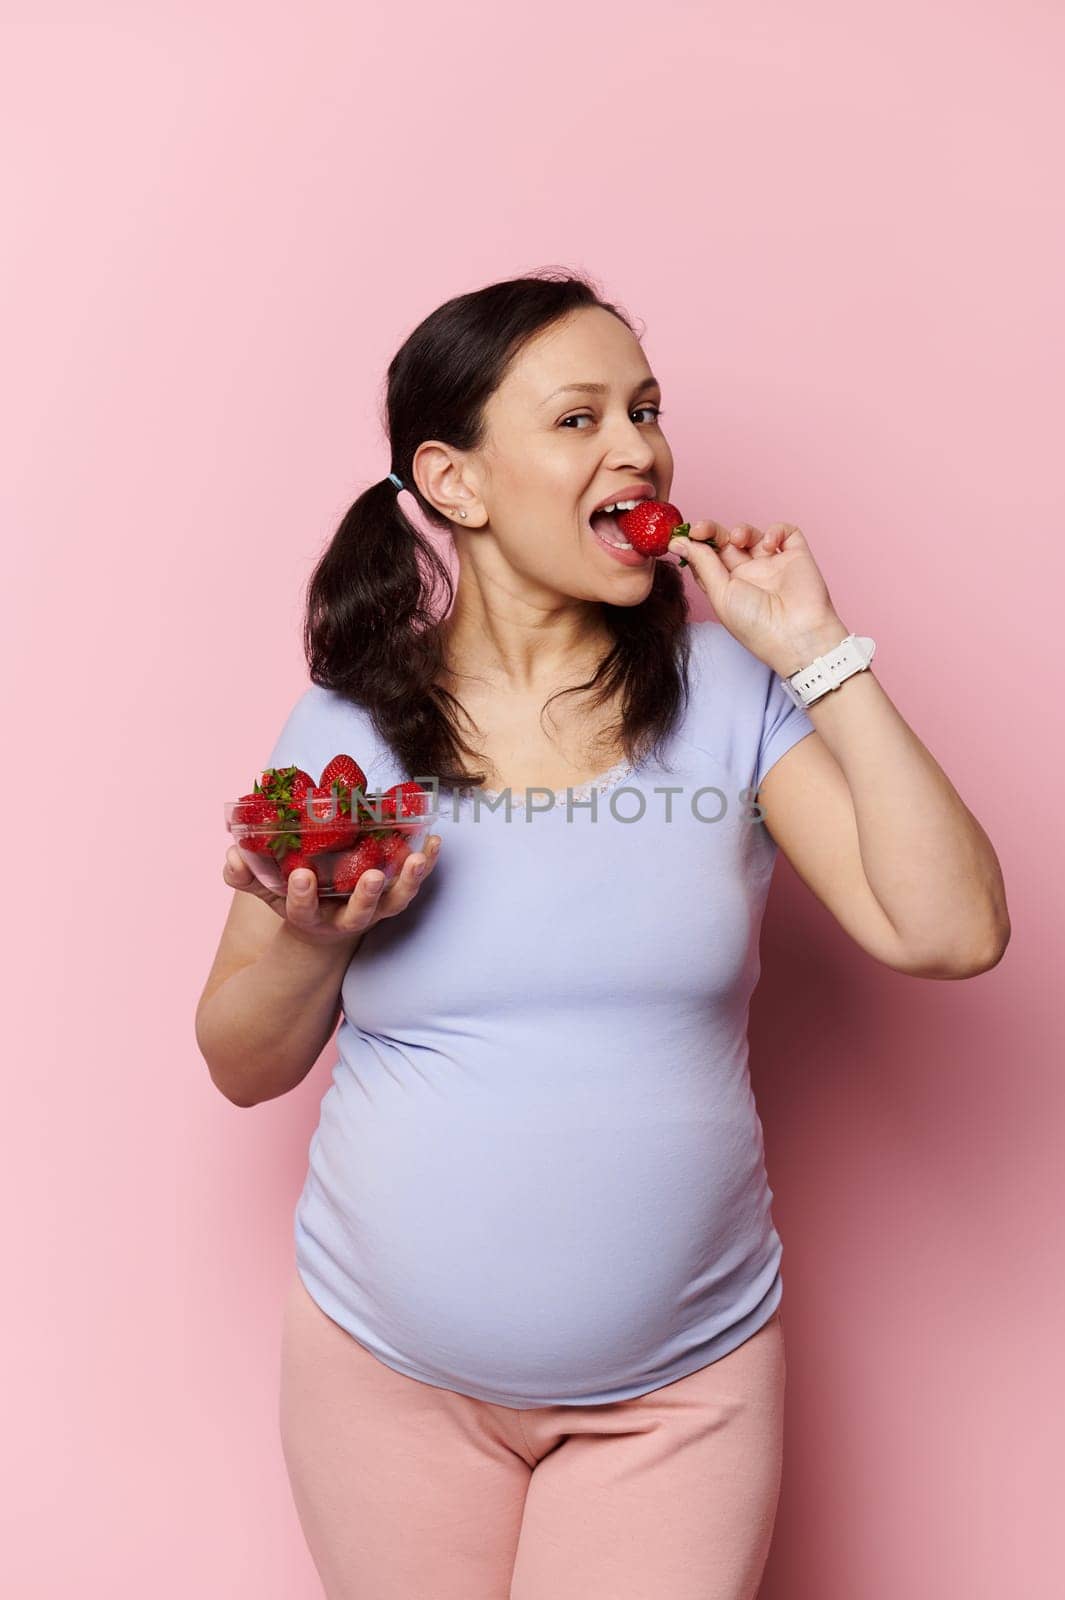 Charming glamour pregnant woman eating fresh sweet strawberries out of bowl, isolated on pink background. Pregnancy diet by artgf